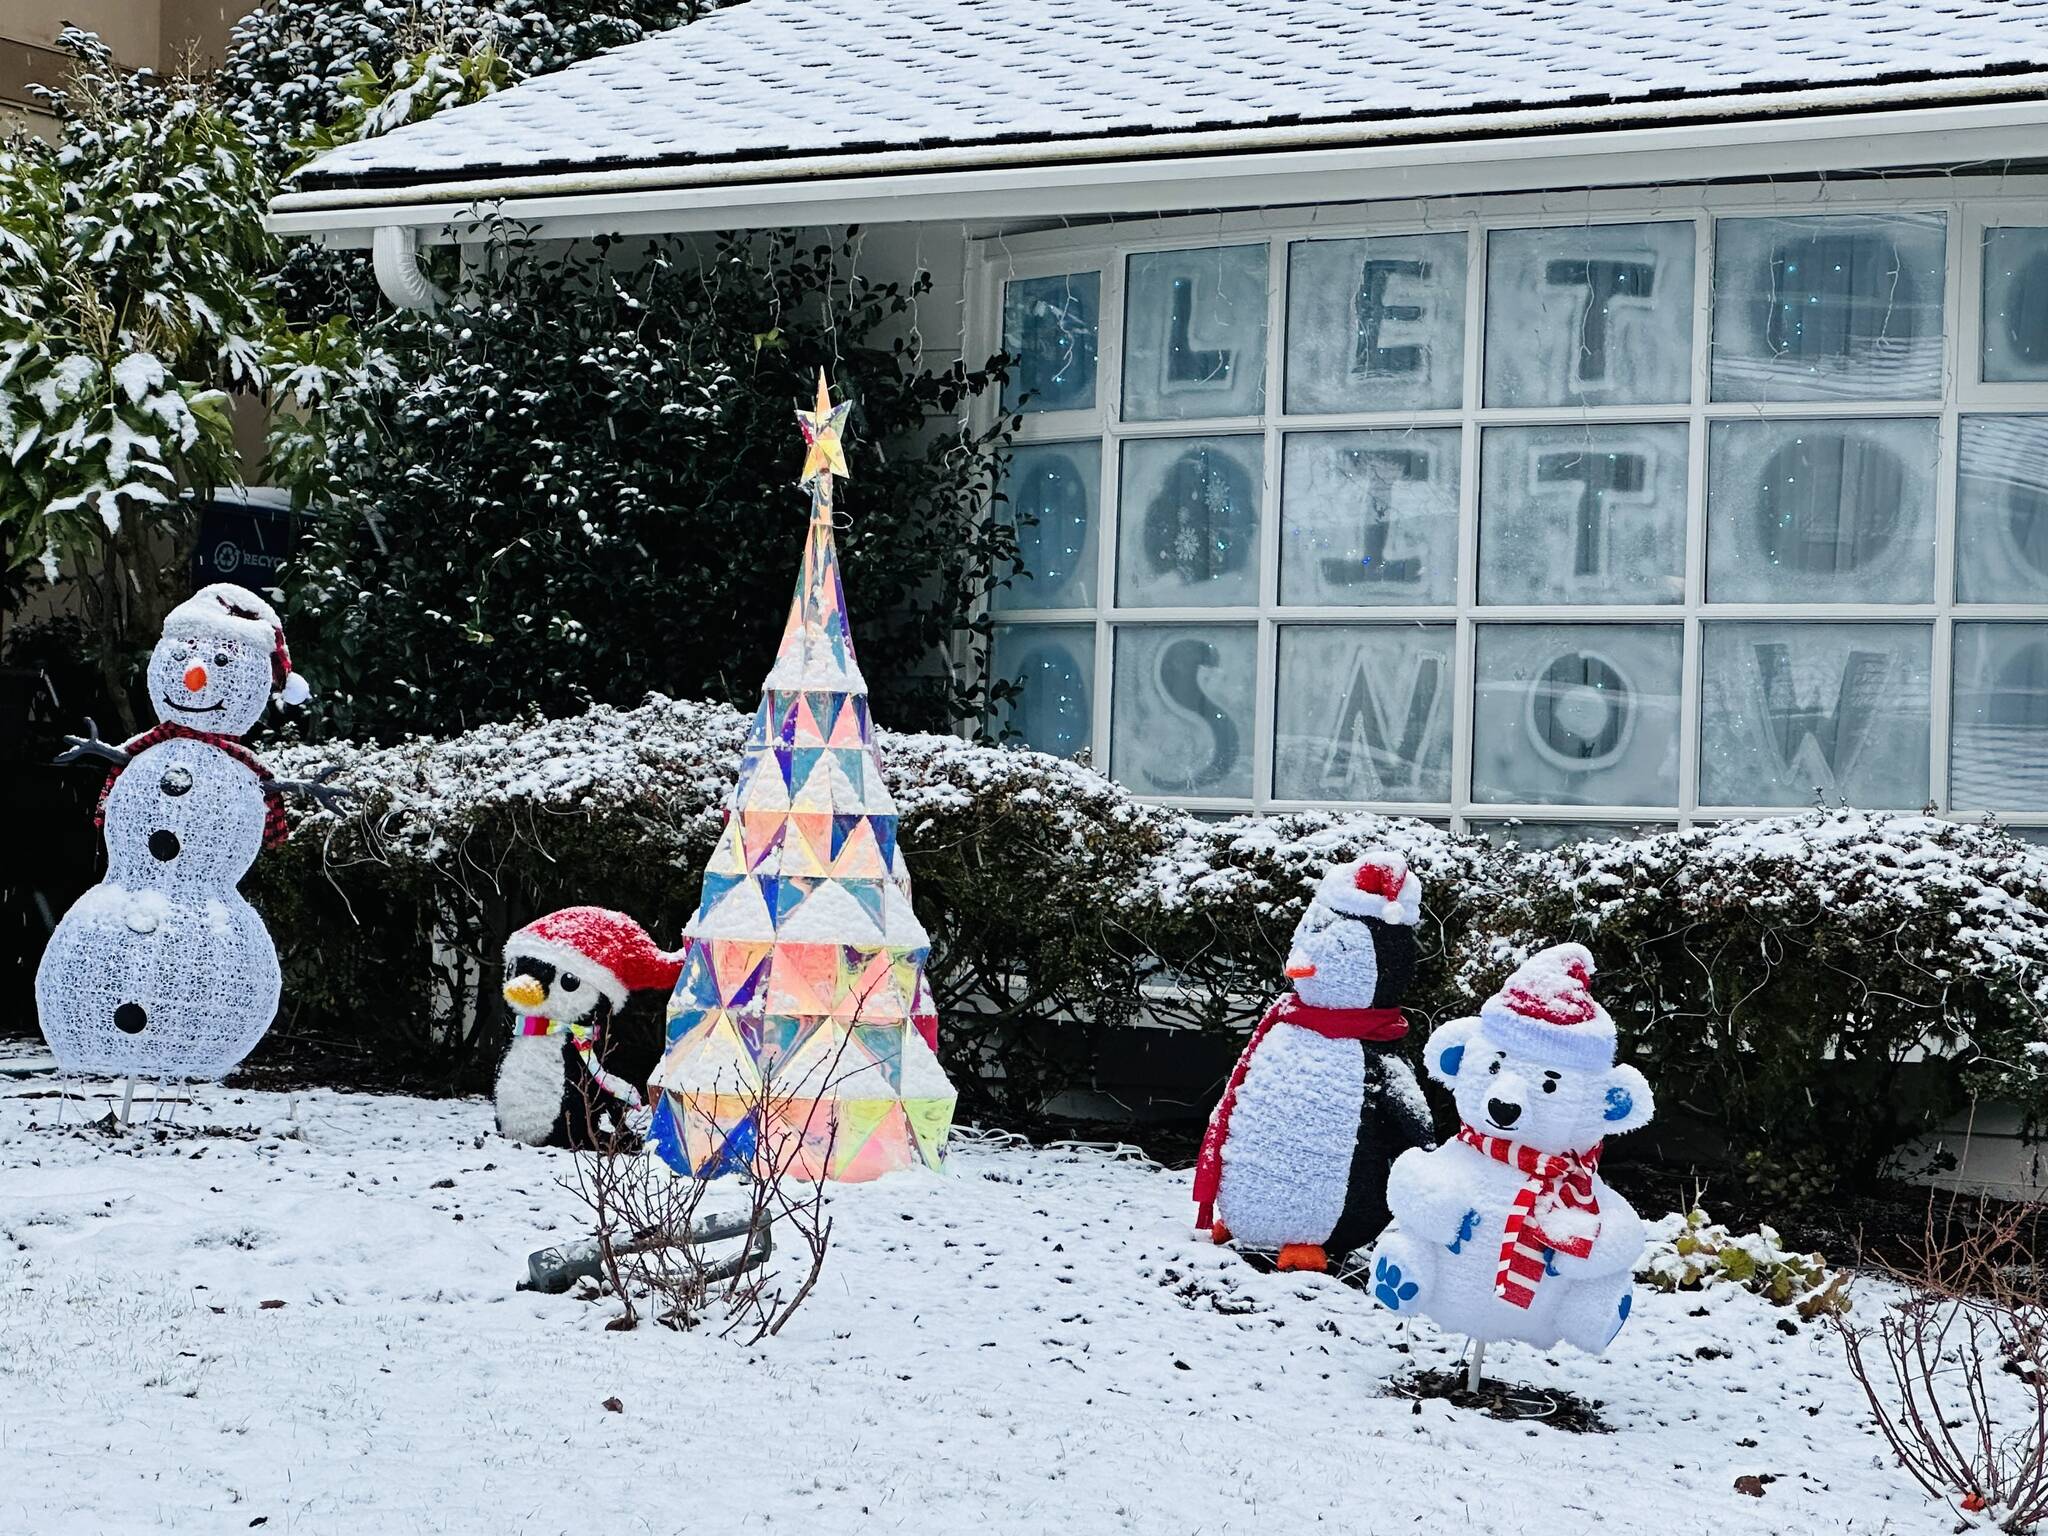 Snow accumulated in some parts of the Puget Sound region. Here’s a scene from a Mercer Island home on Dec. 19, 2022. Photo courtesy of Greg Asimakoupoulos